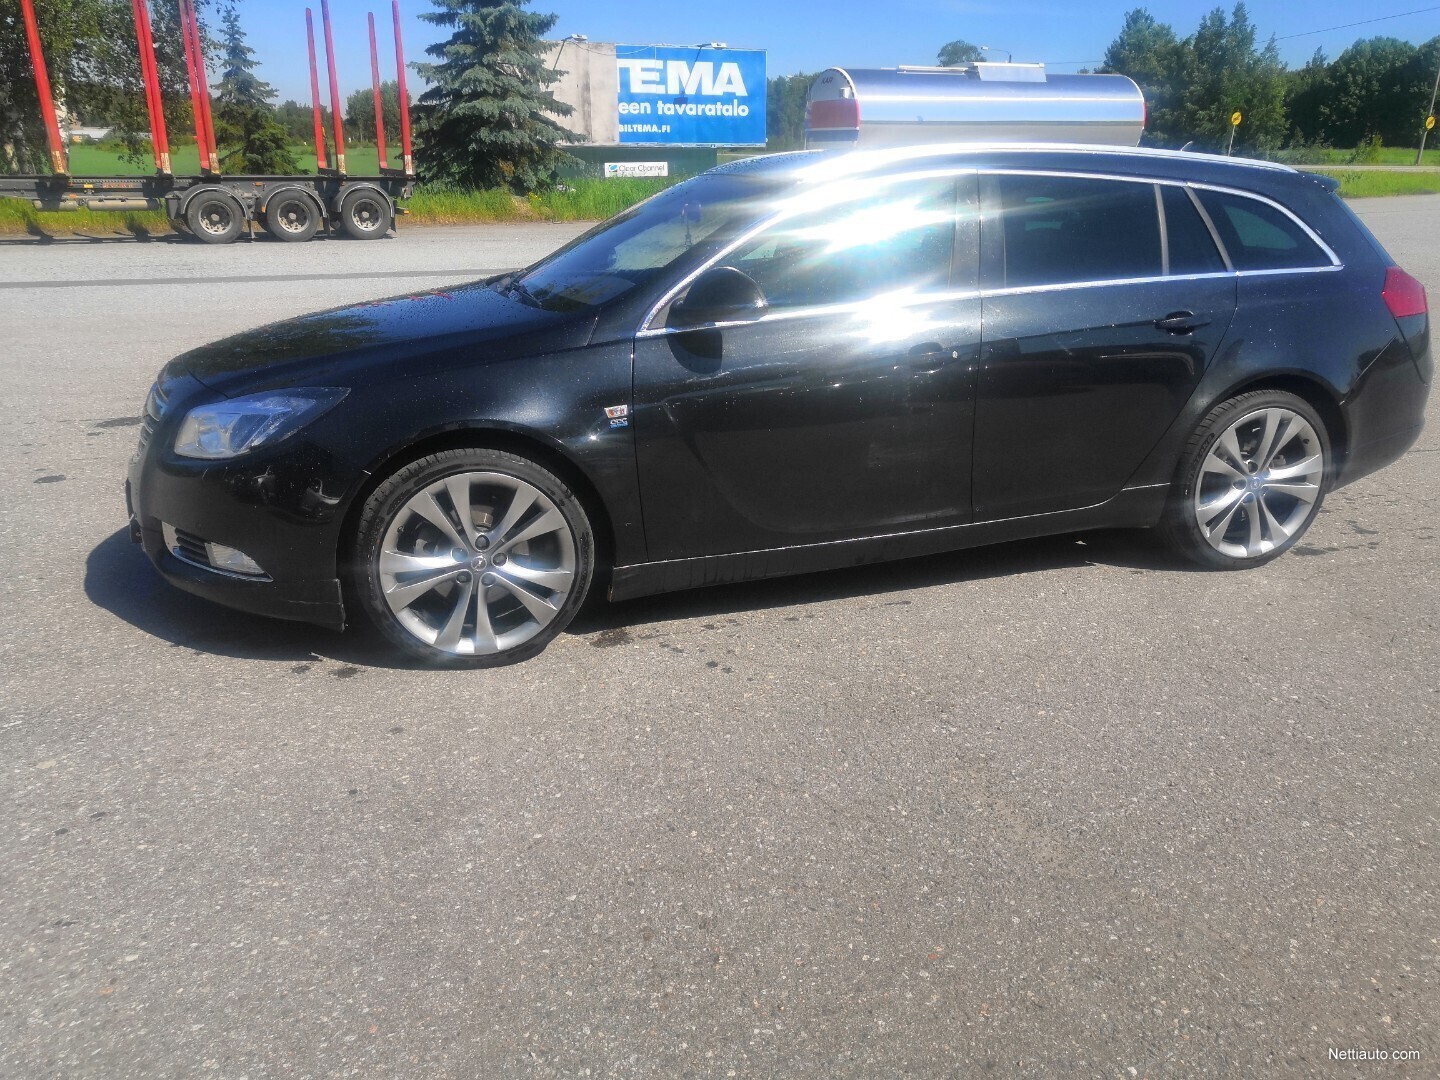 Actor To Nine tennis Opel Insignia Sports Tourer Sport 2,0 CDTI 4x4 120kW AT6 Station Wagon 2012  - Used vehicle - Nettiauto